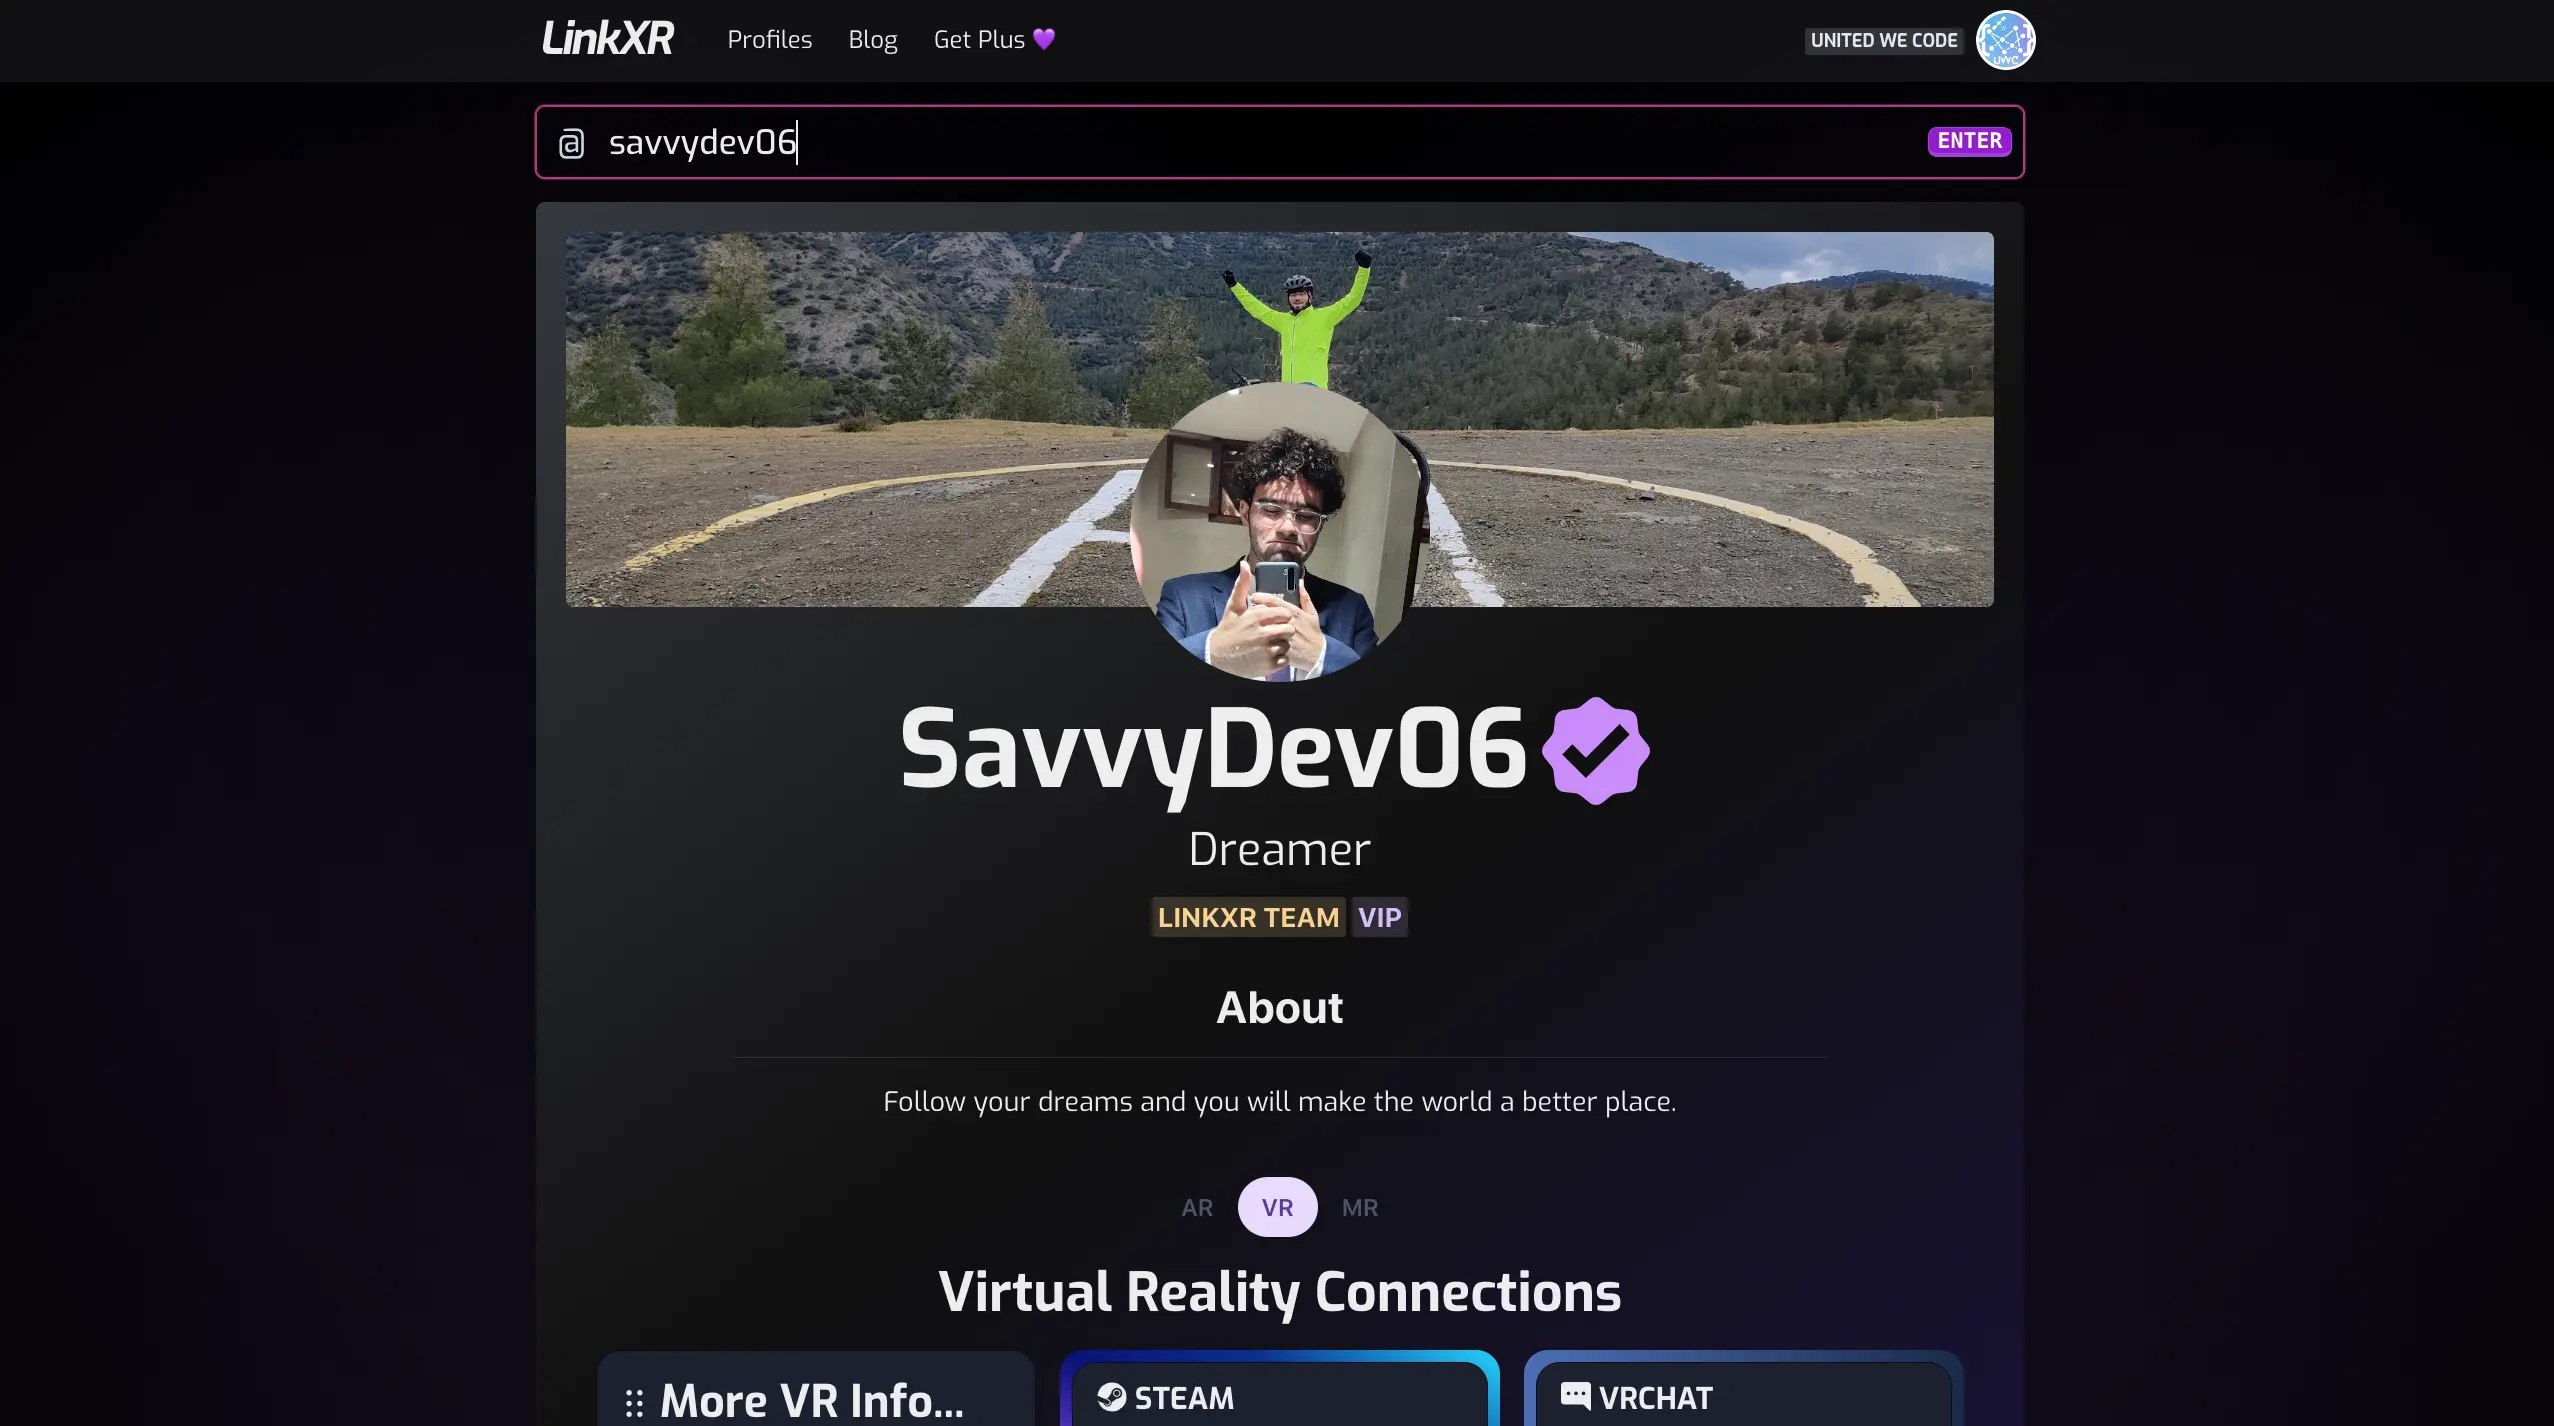 Savvy's profile page on LinkXR